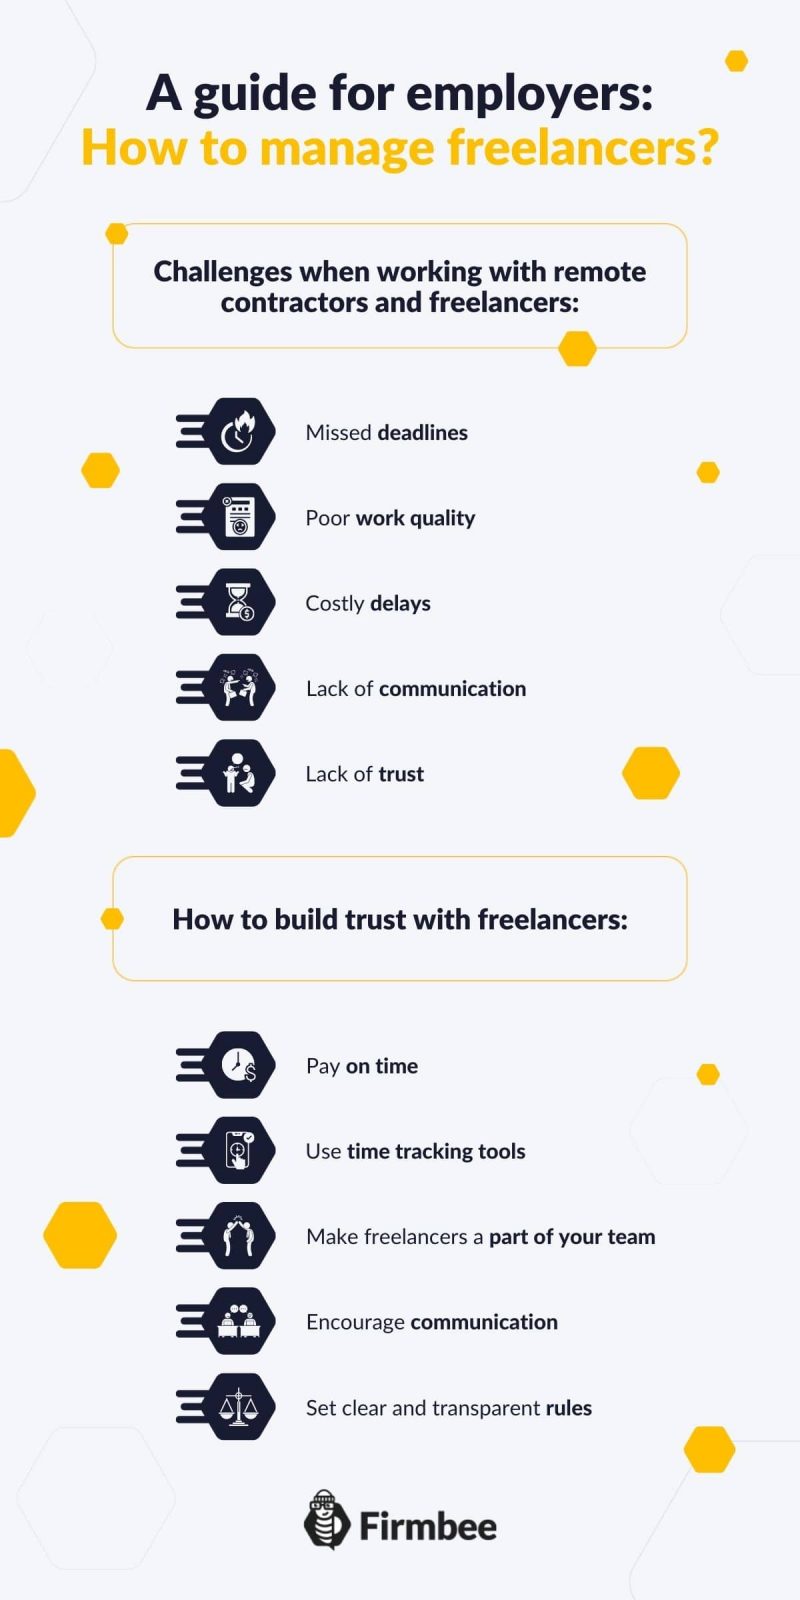 How to manage freelancers